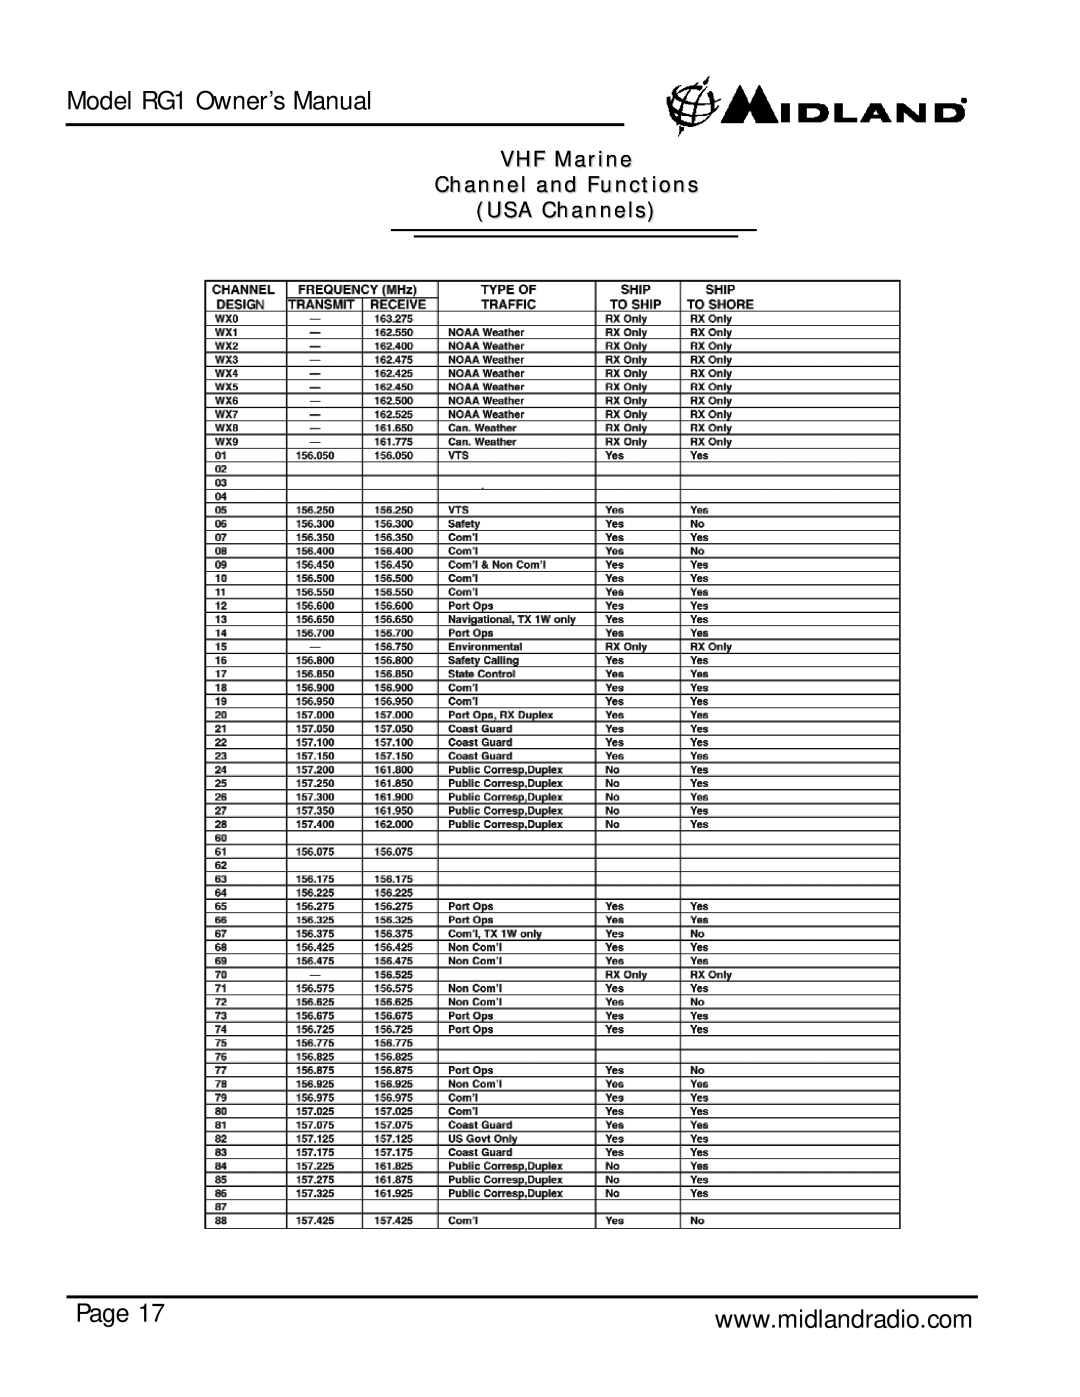 Midland Radio Regatta 1 owner manual VHF Marine Channel and Functions USA Channels, Page 